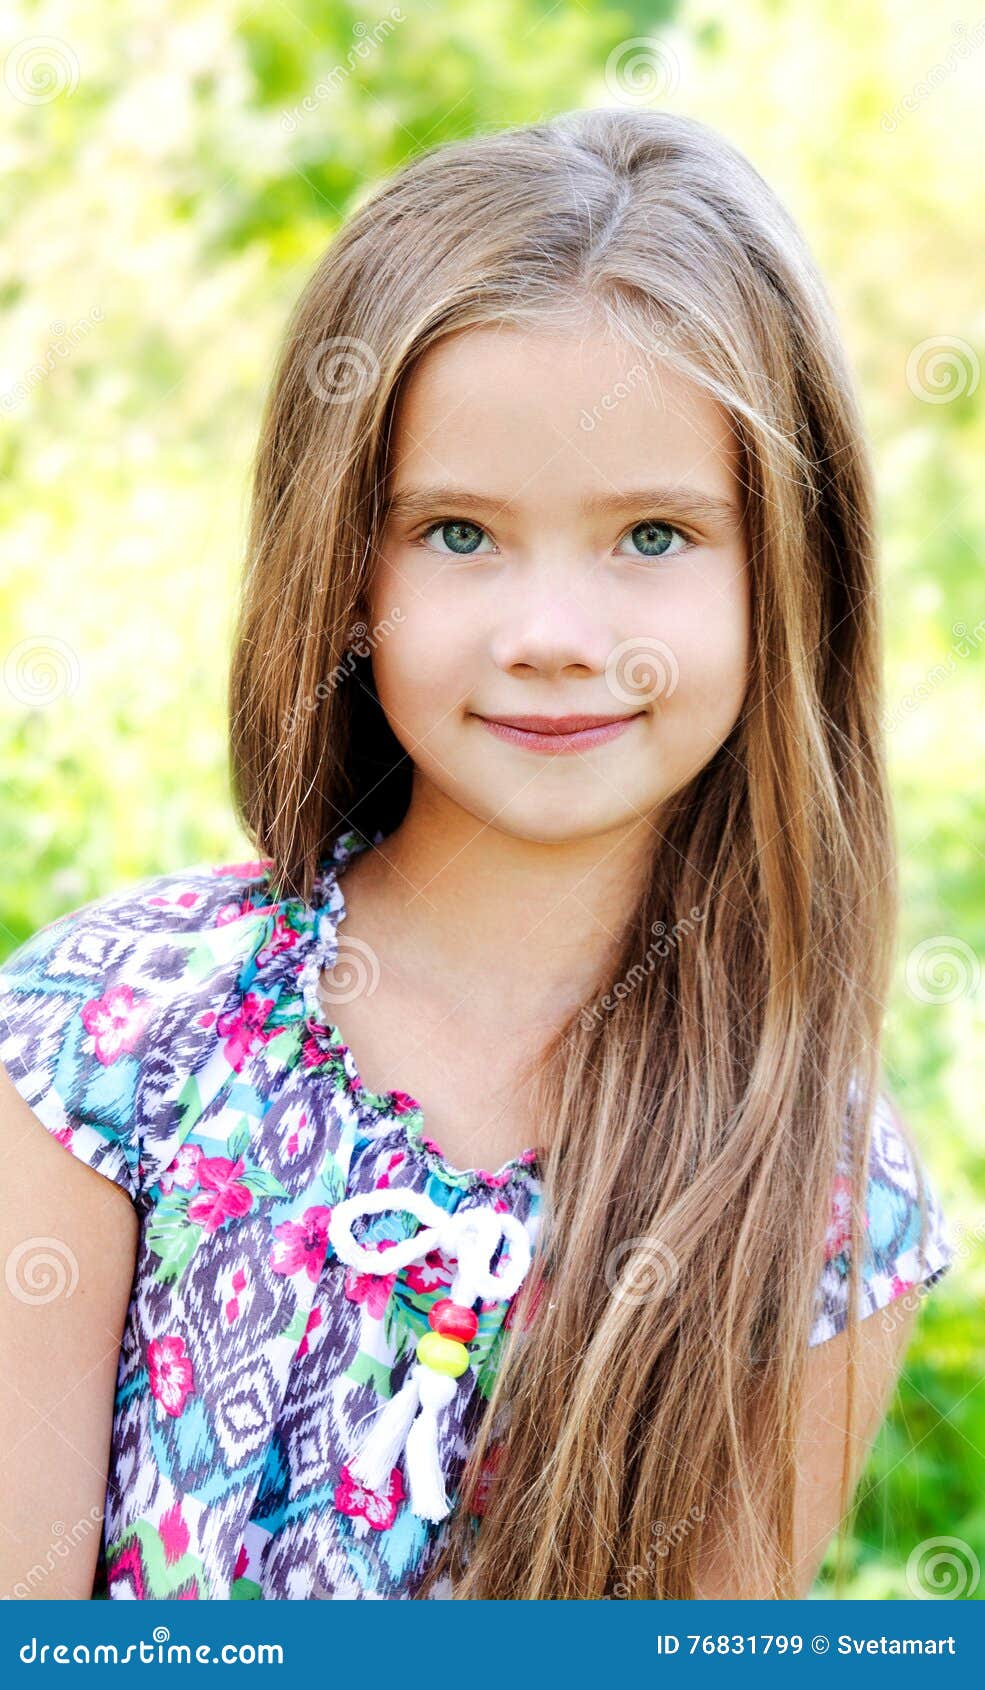 Portrait of Adorable Smiling Little Girl in Summer Day Stock Image ...